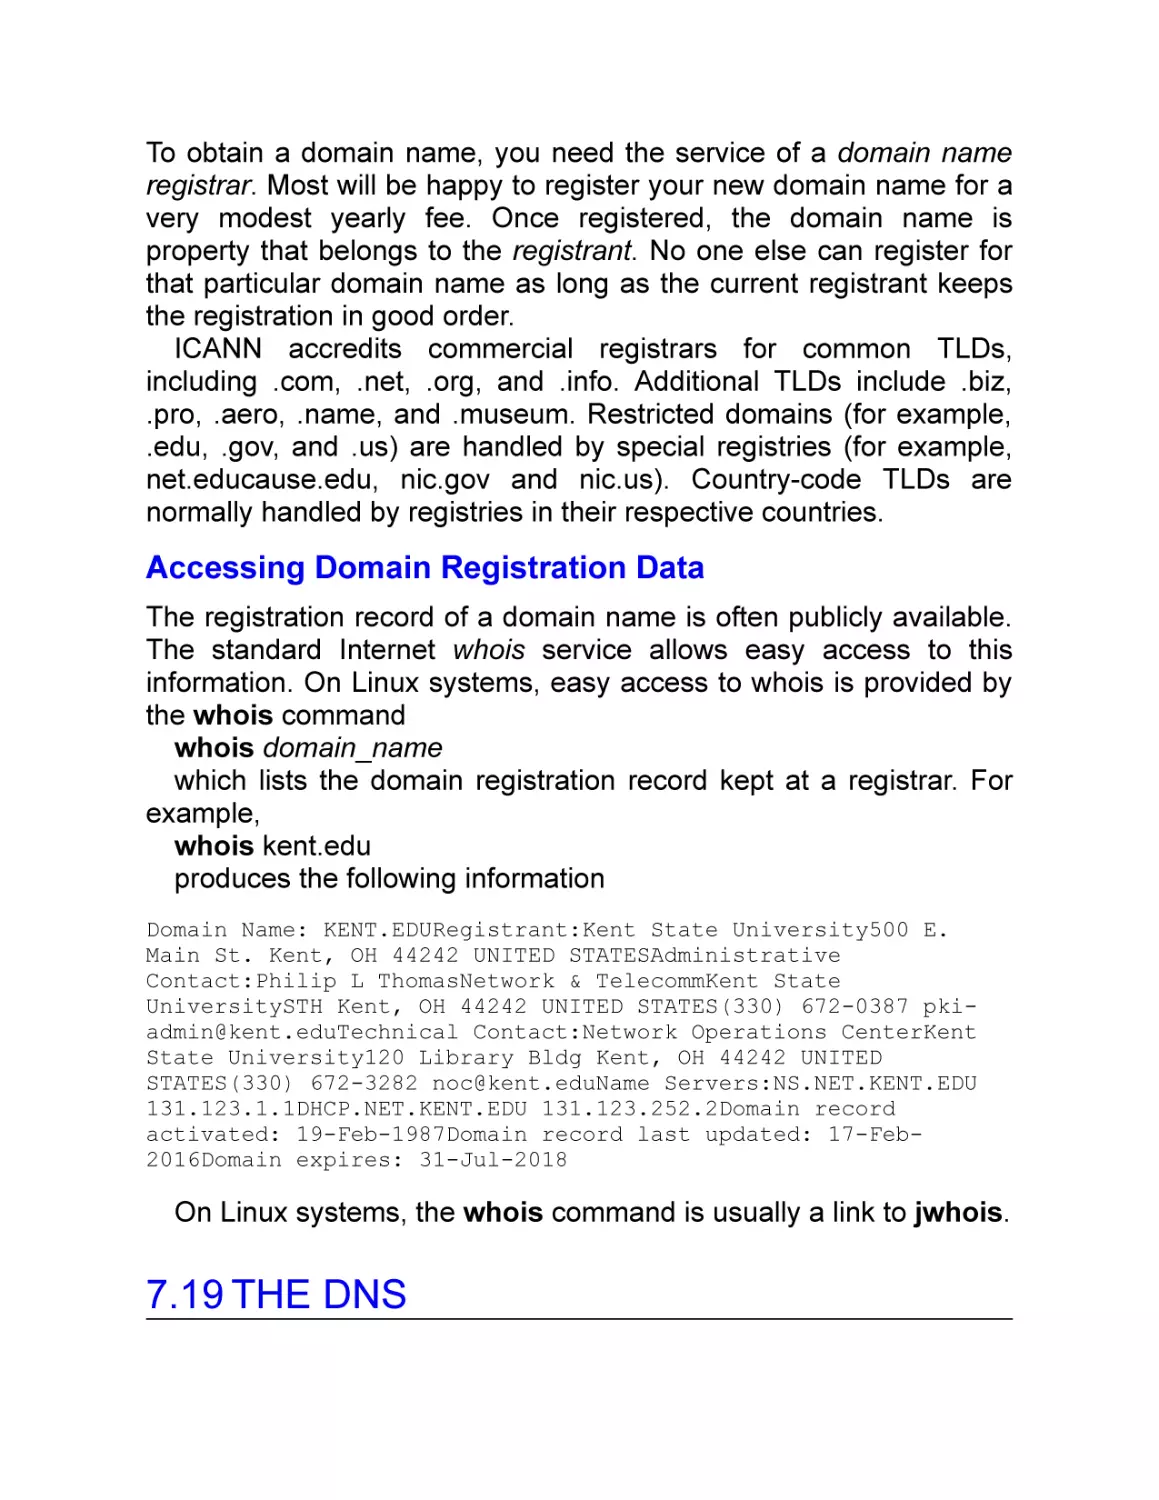 Accessing Domain Registration Data
7.19 The DNS